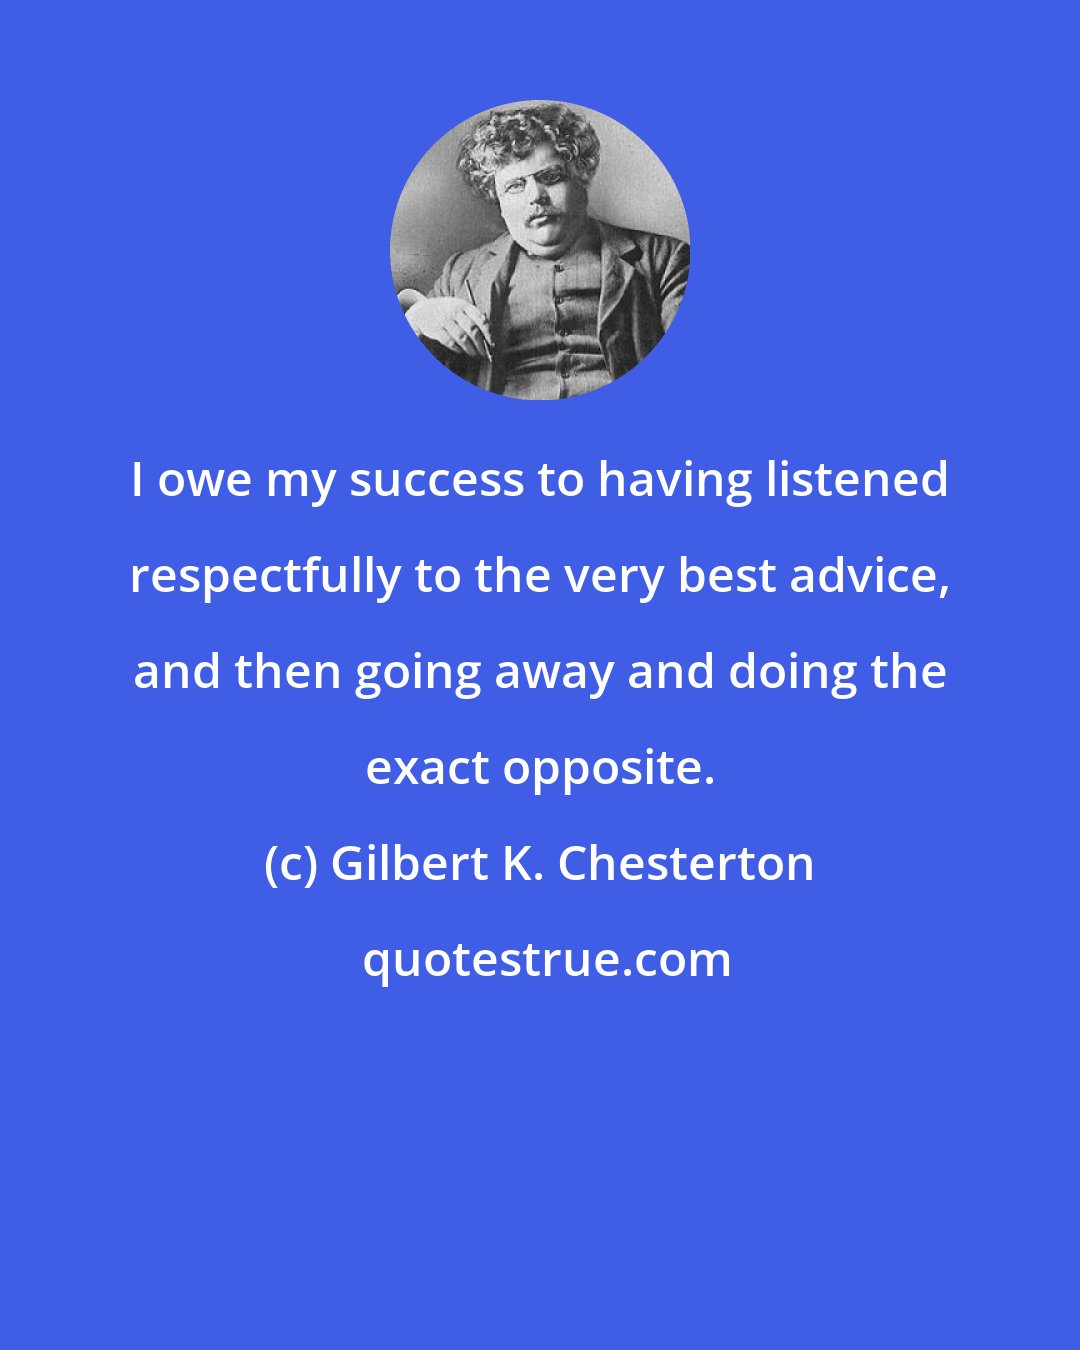 Gilbert K. Chesterton: I owe my success to having listened respectfully to the very best advice, and then going away and doing the exact opposite.